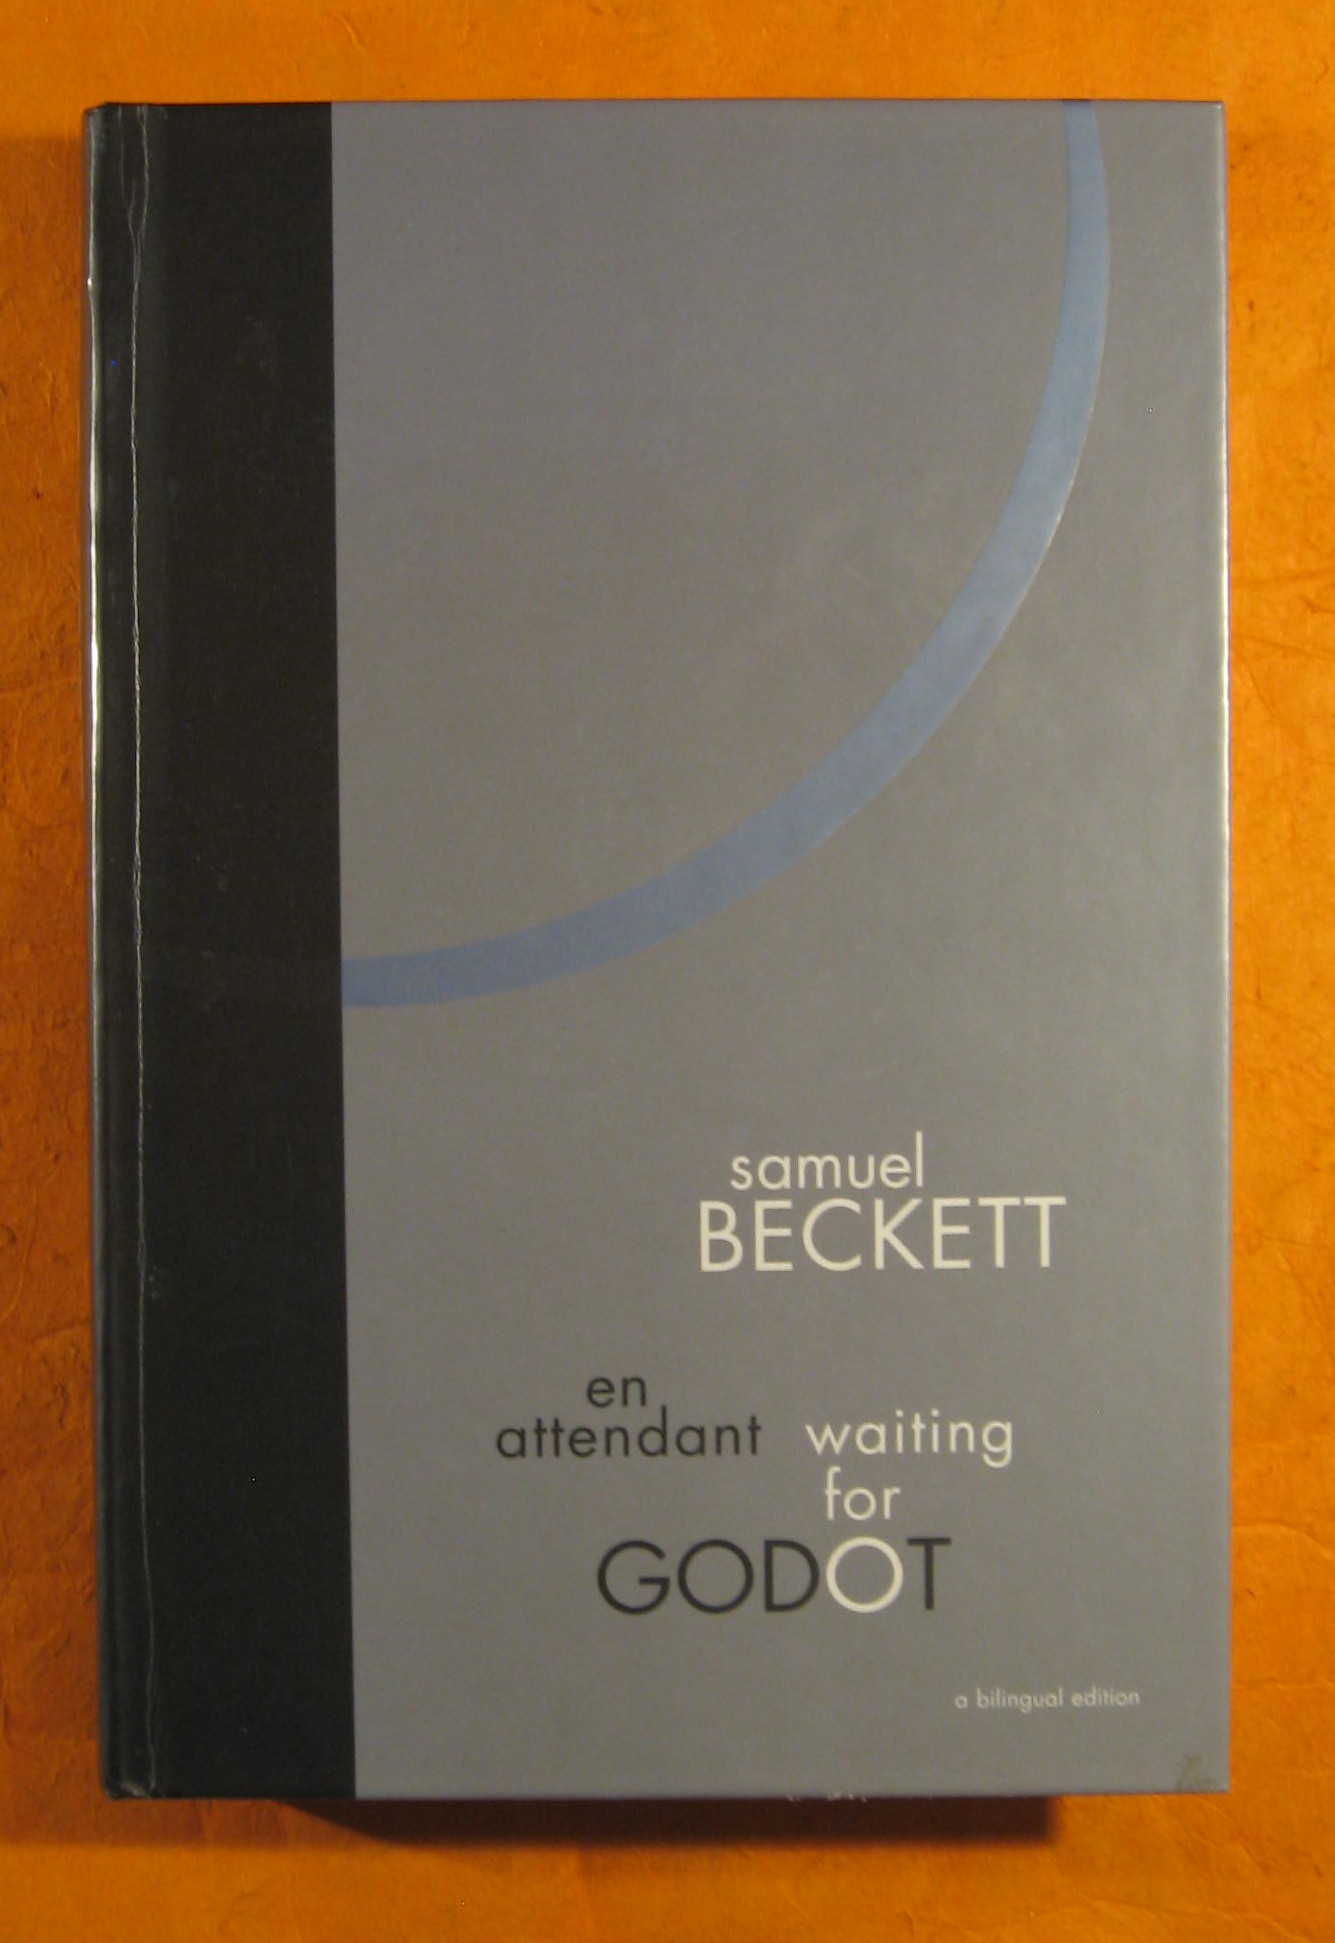 why is waiting for godot a tragicomedy